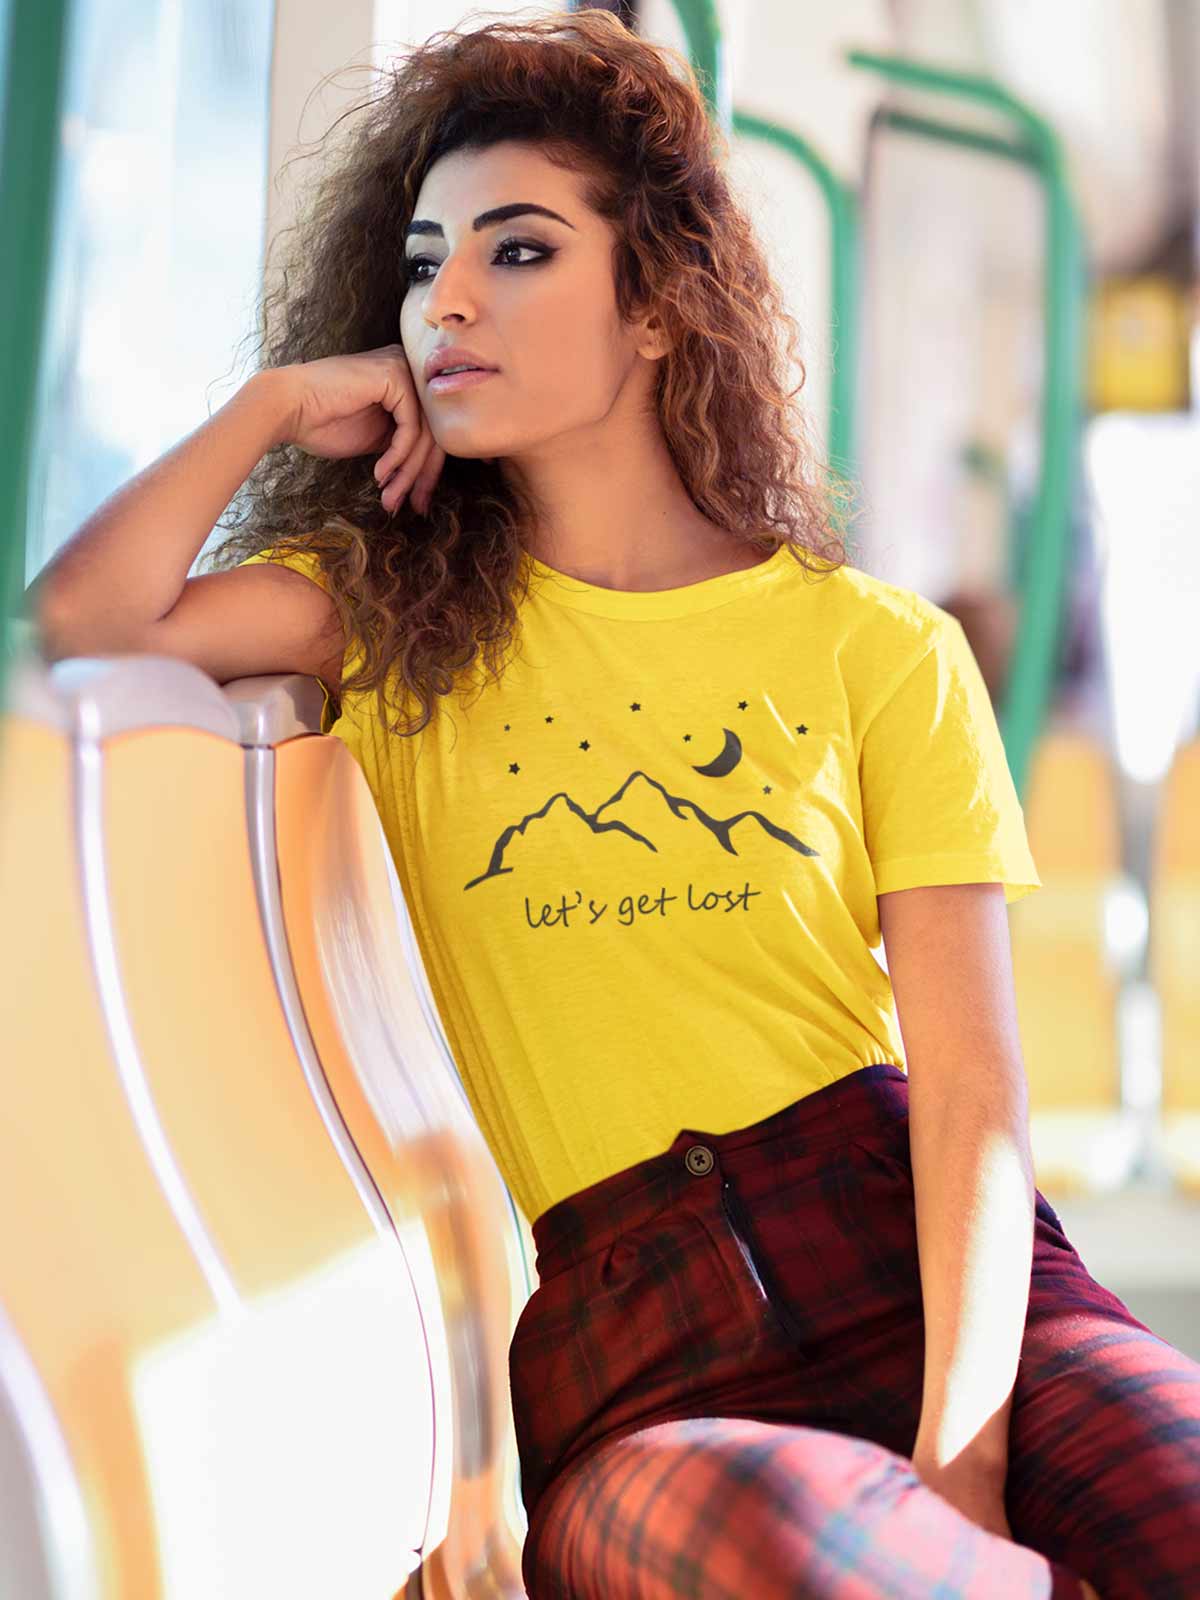 Lets-get-lost-printed-t-shirt-for-women by Ghumakkad